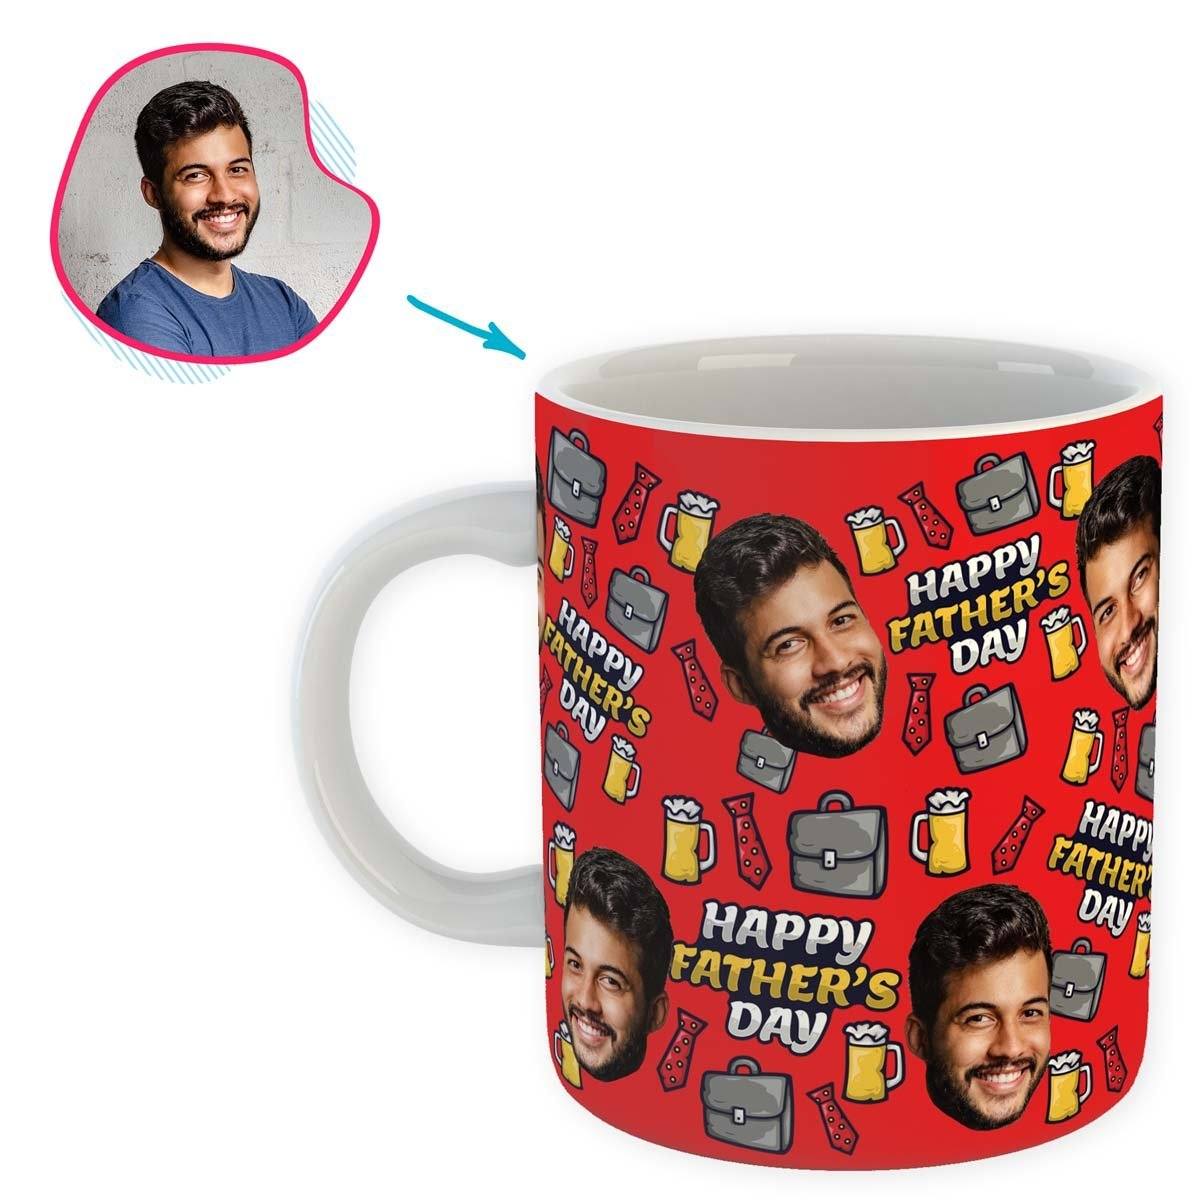 Red Fathers Day personalized mug with photo of face printed on it